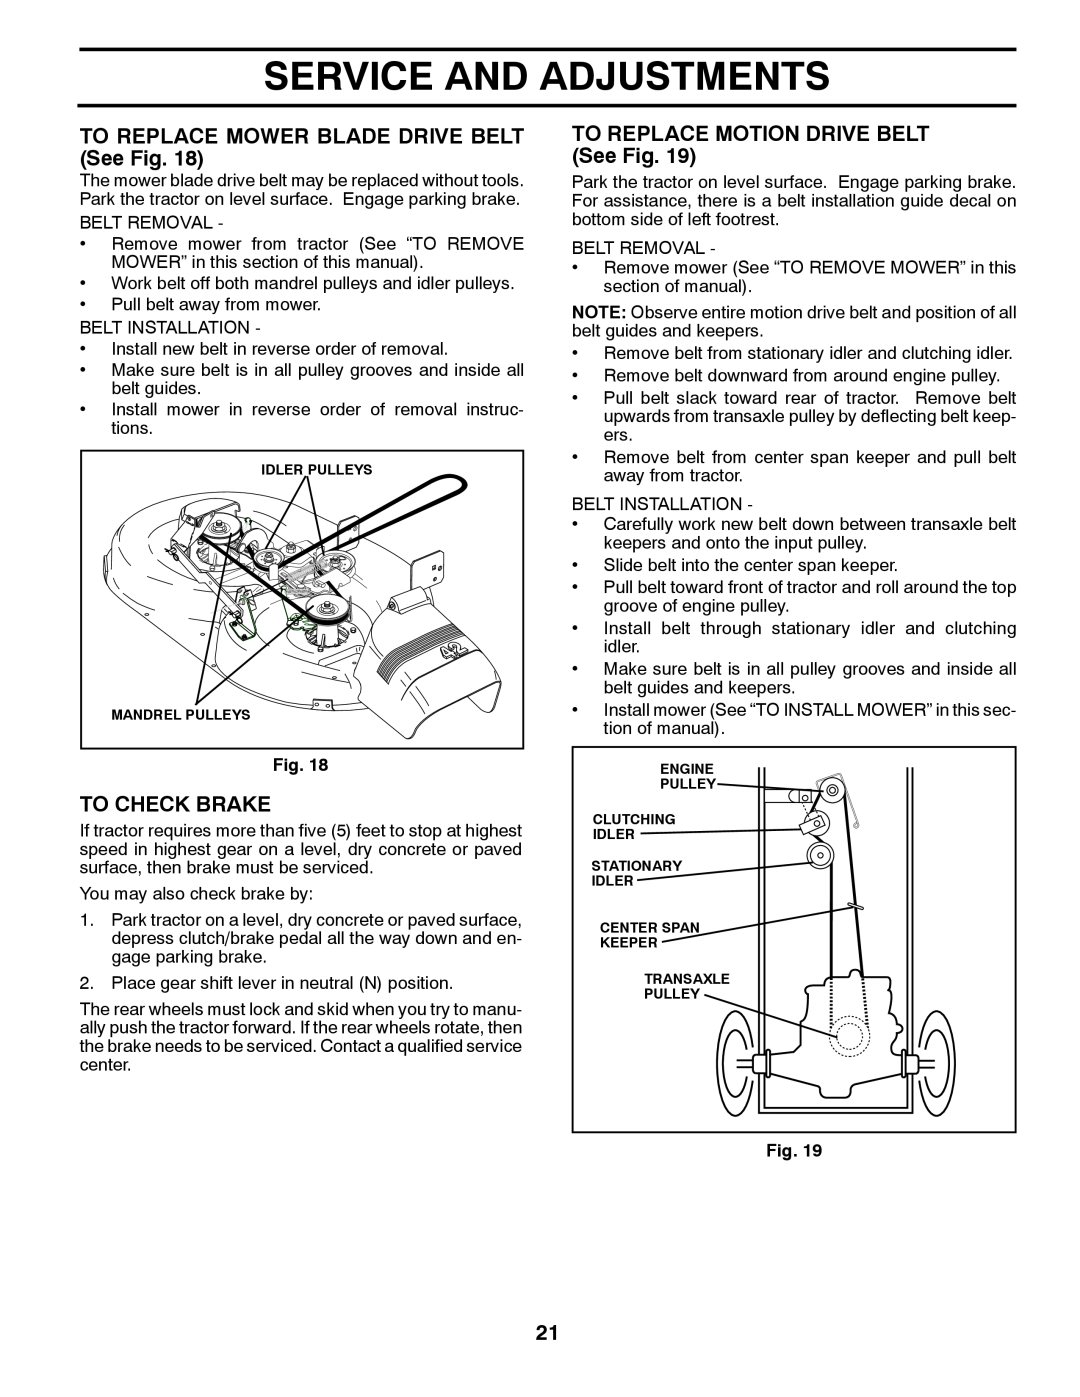 Poulan 438495, PO19542LT TO REPLACE MOWER BLADE DRIVE BELT See Fig, To Check Brake, TO REPLACE MOTION DRIVE BELT See Fig 